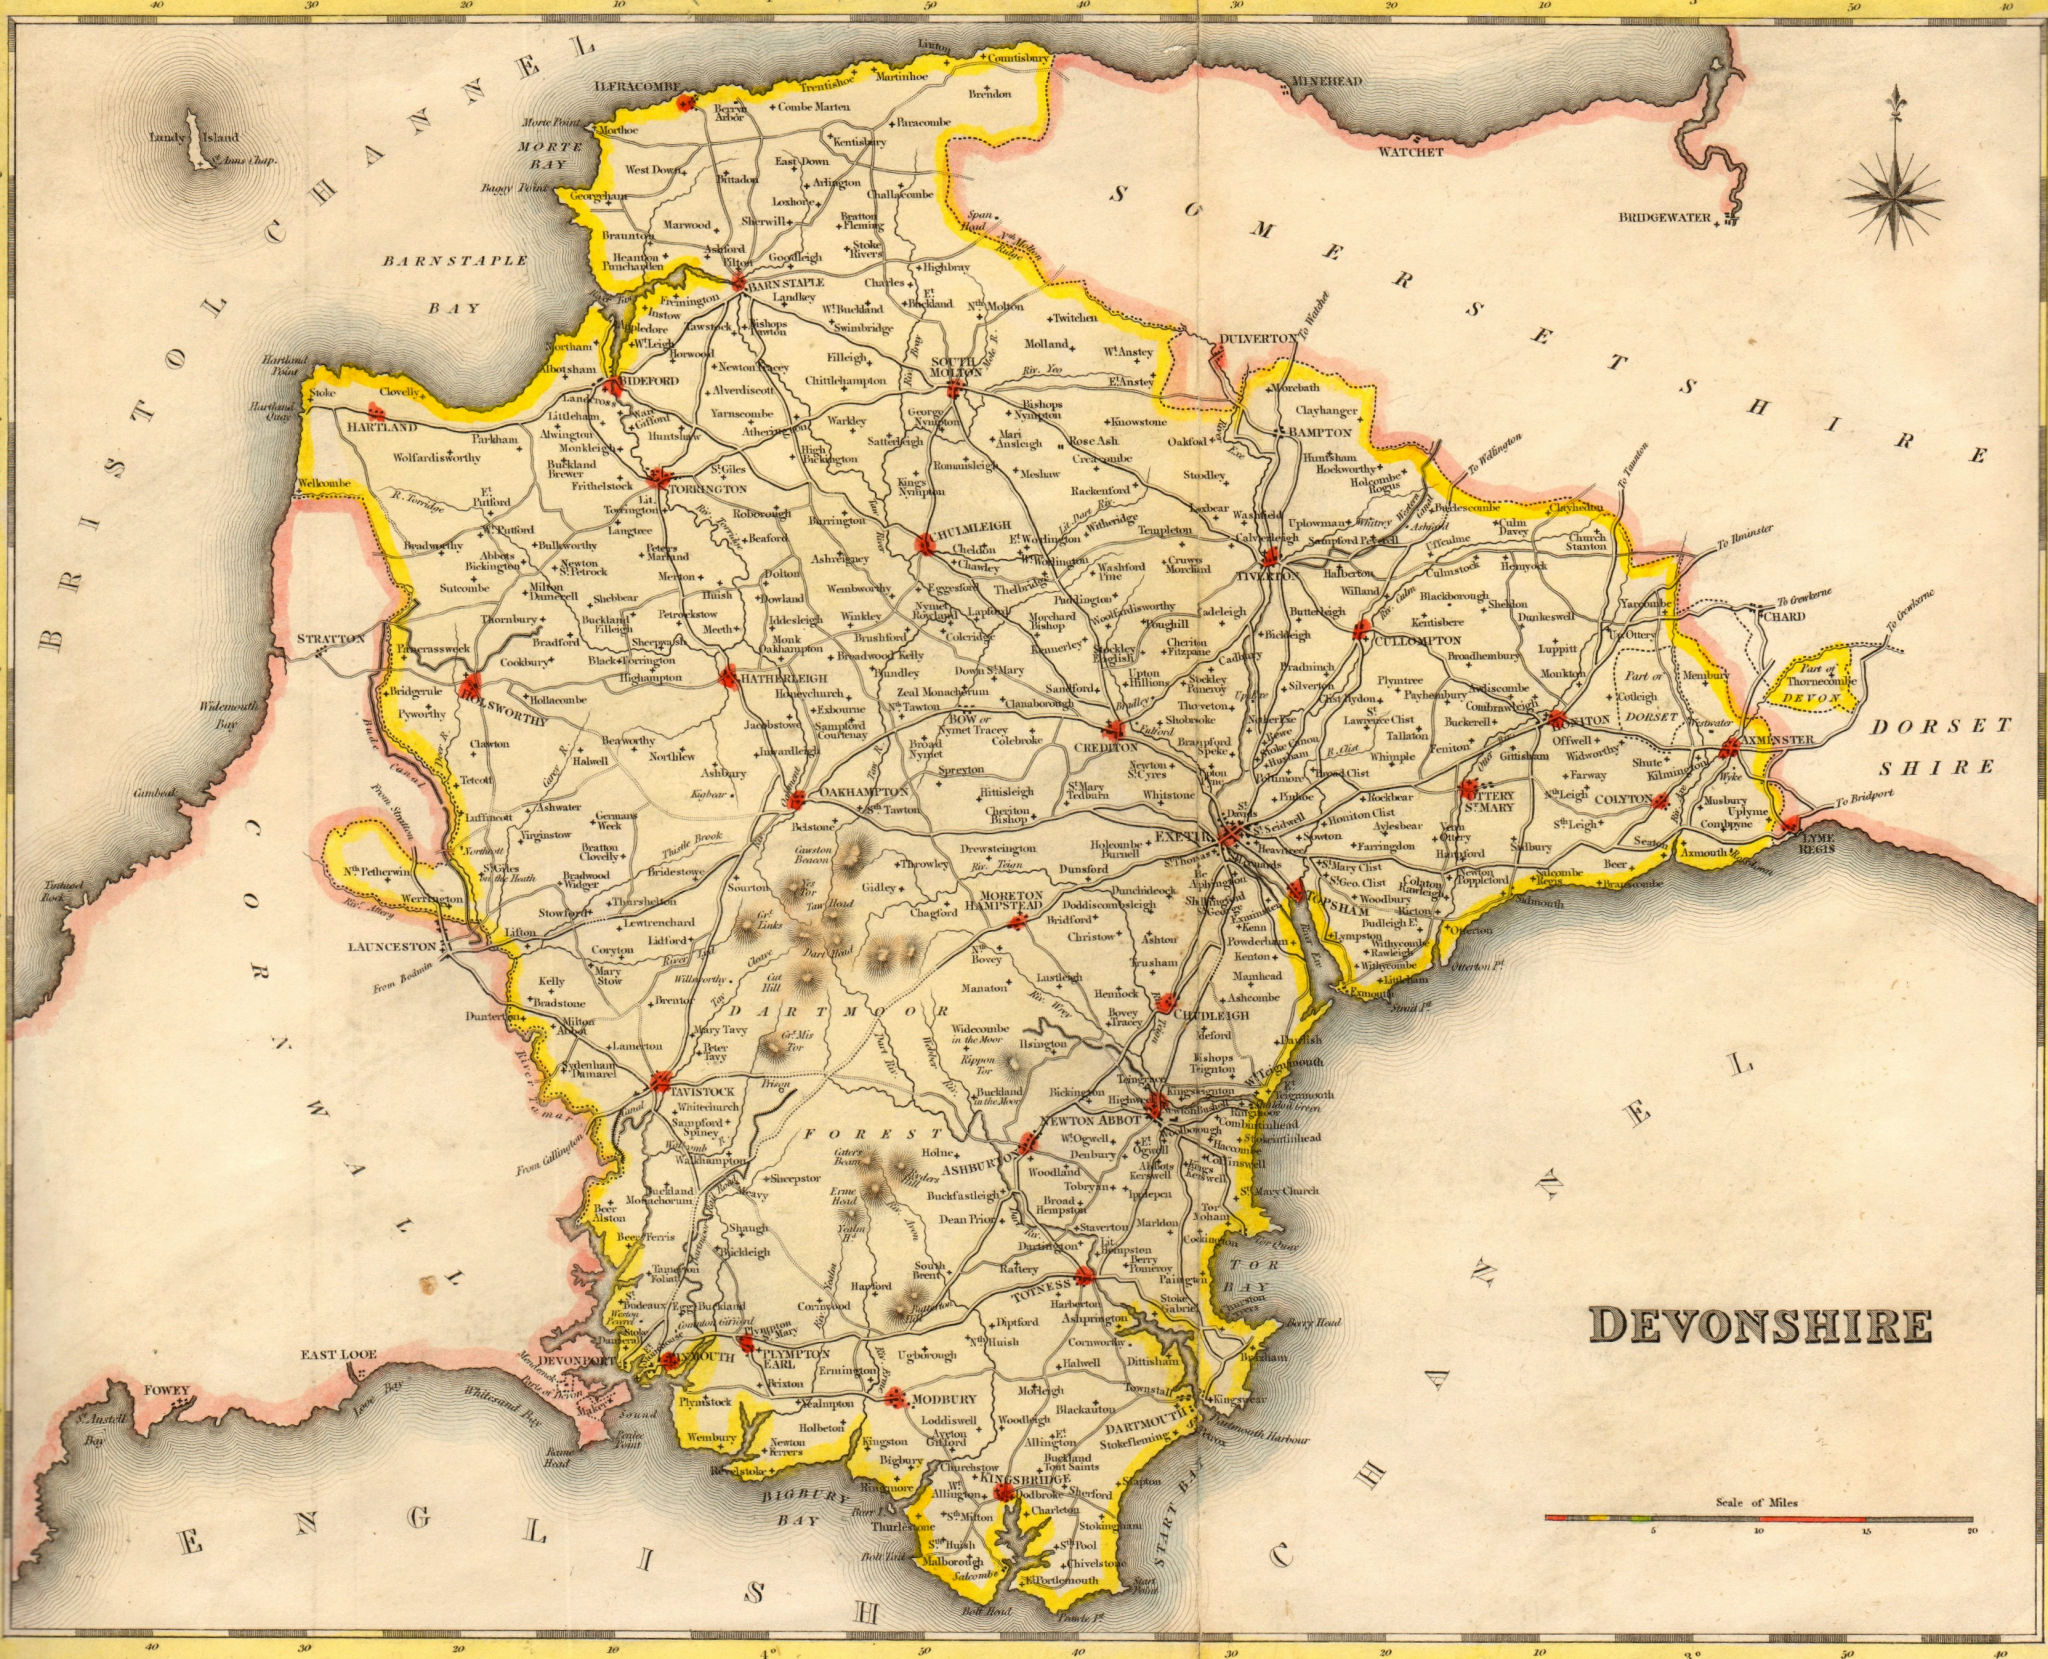 Antique county map of DEVONSHIRE by Creighton & Walker for Lewis. Coloured c1840